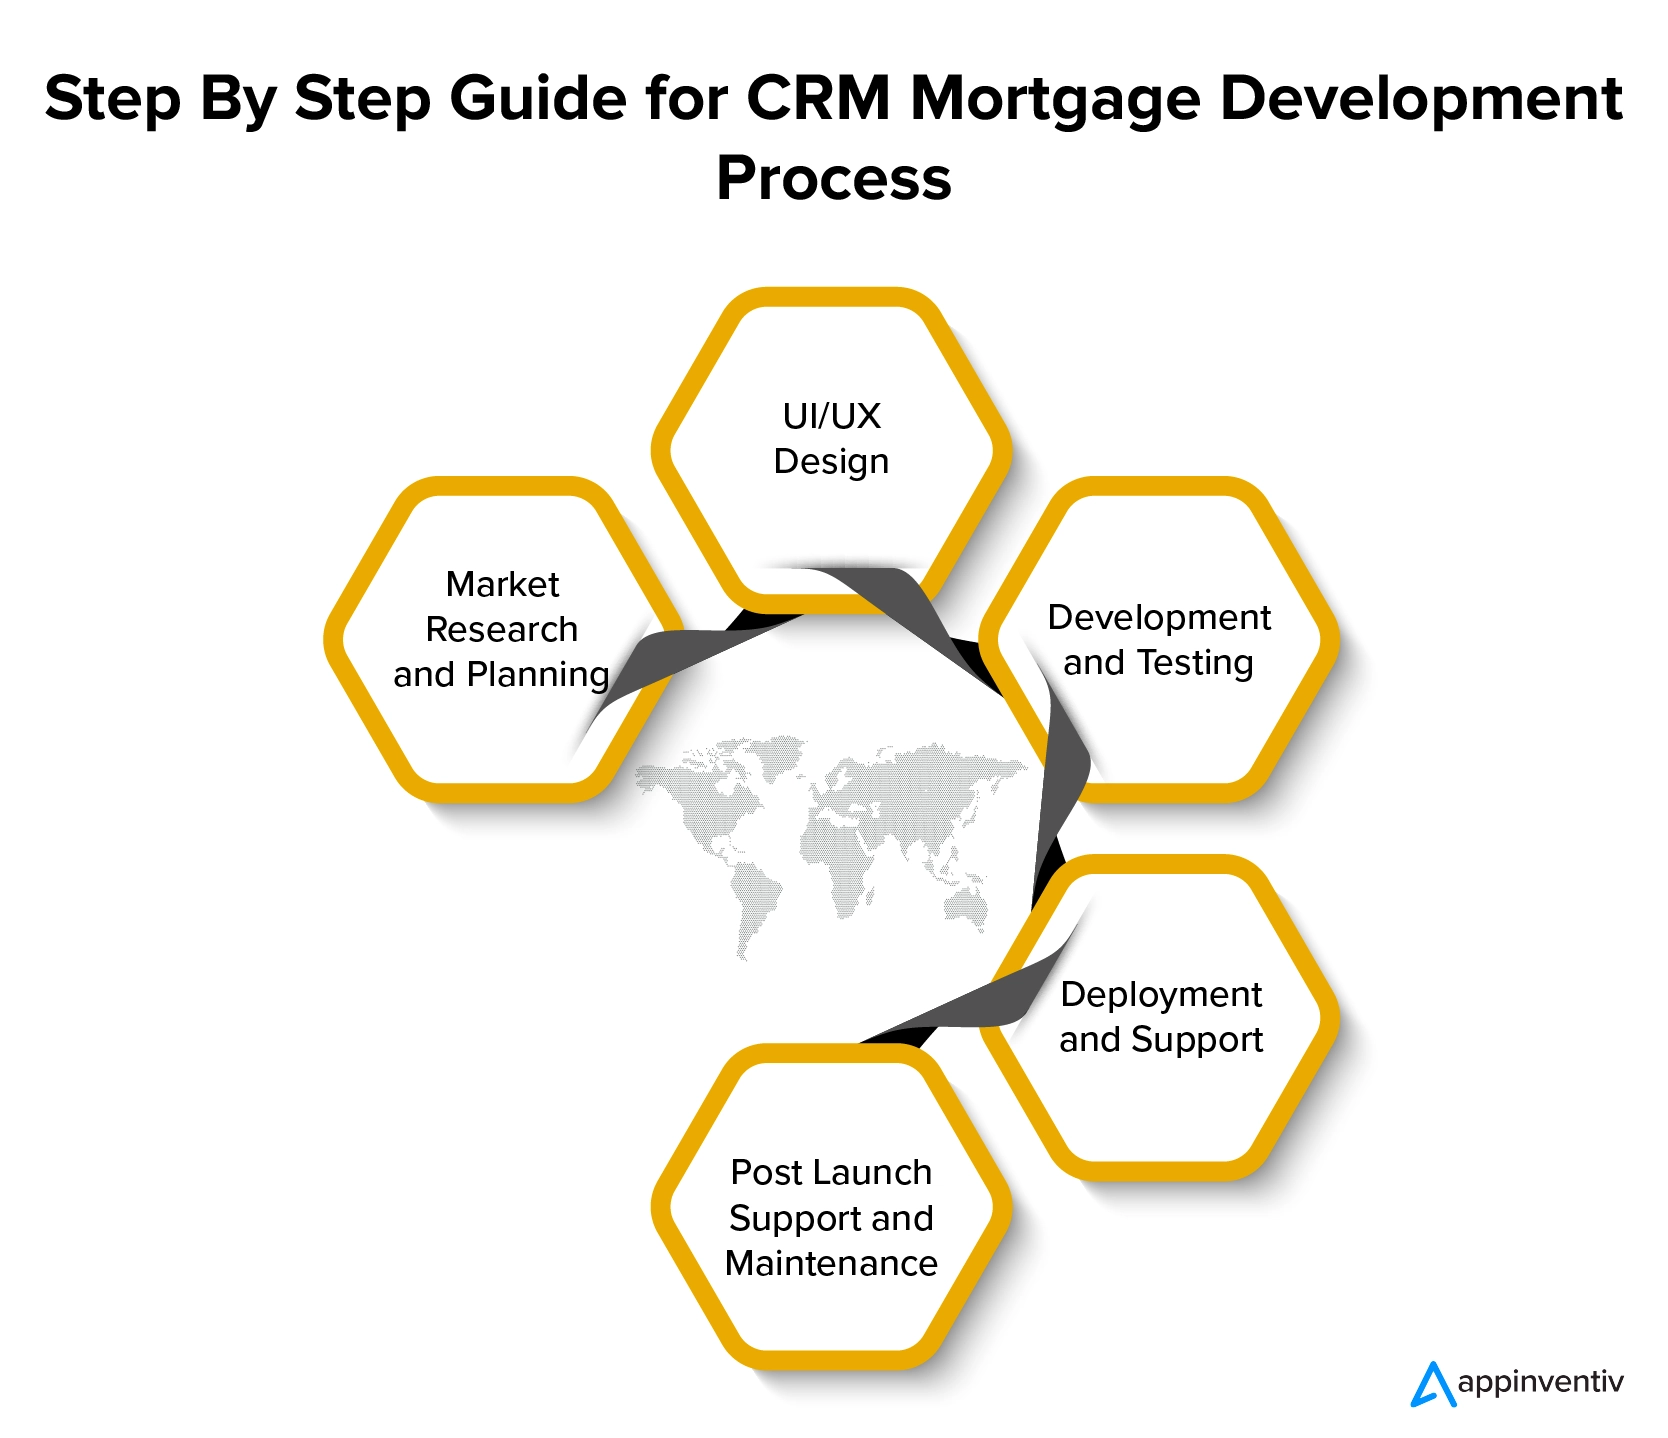 Step By Step Guide for CRM Mortgage Development Process